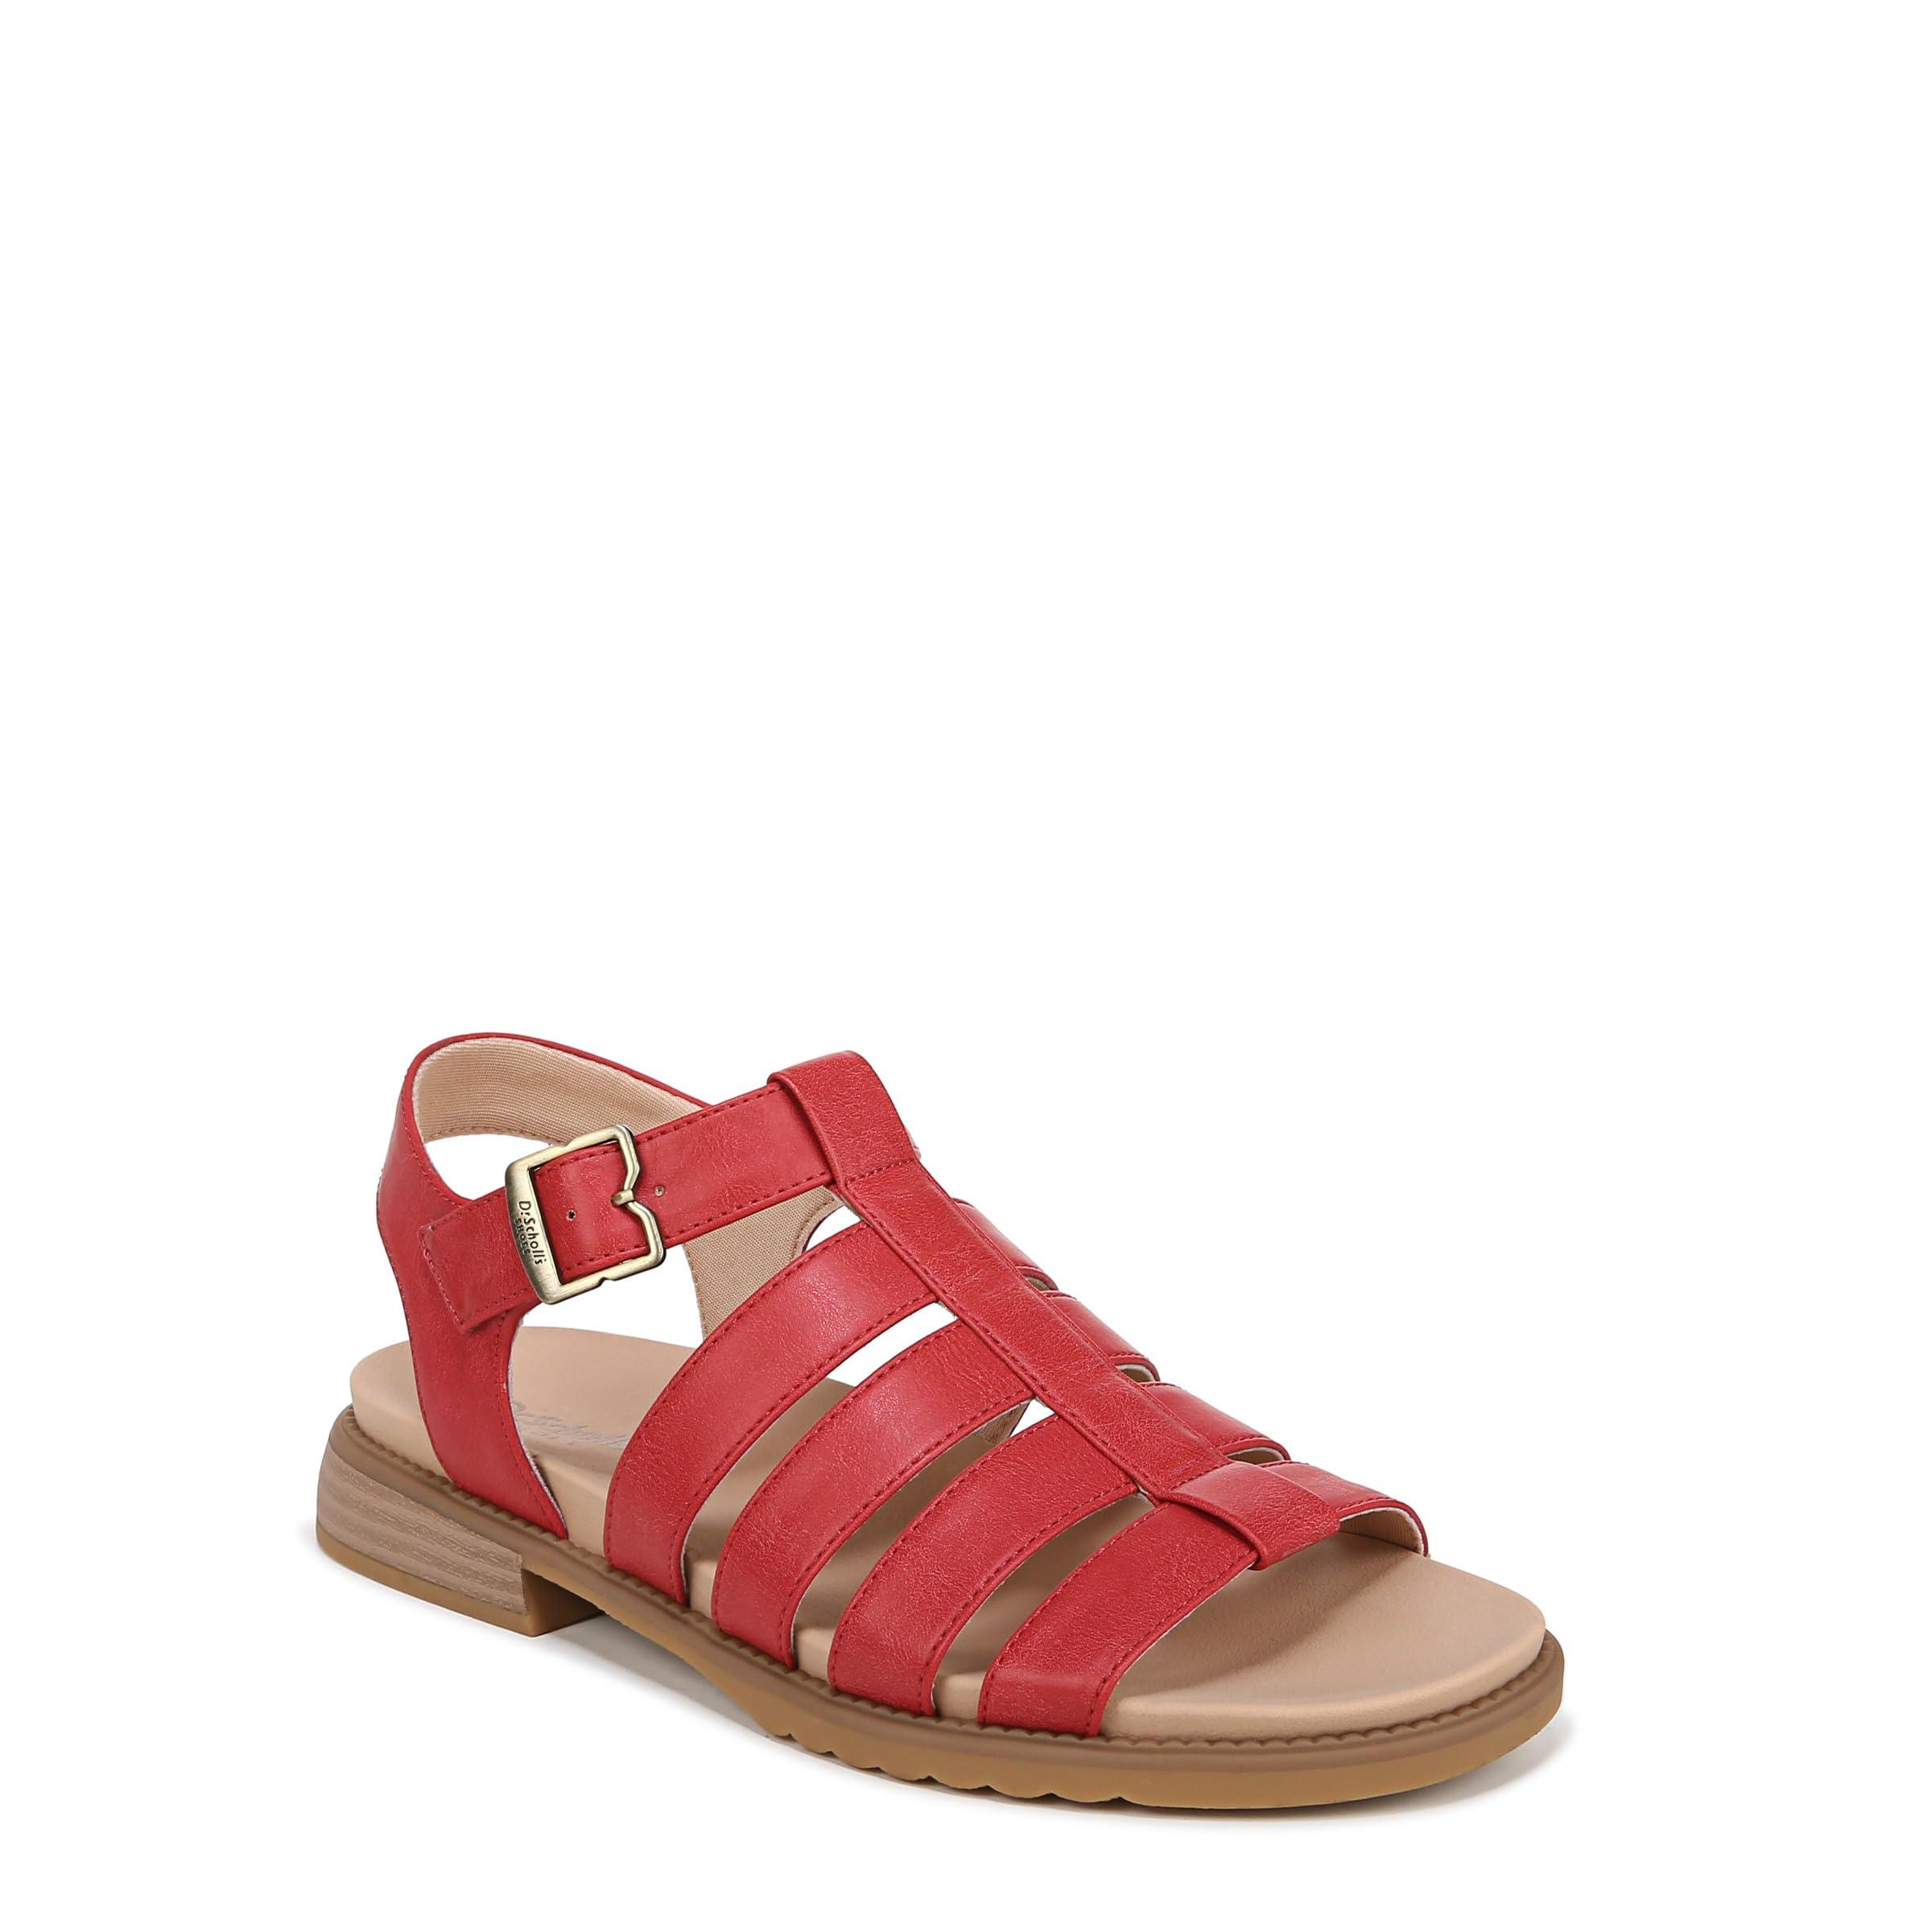 Dr. Scholls Dr. Scholl's S A Ok Flat Sandal Heritage Red Smooth 8.5 M | Lyst